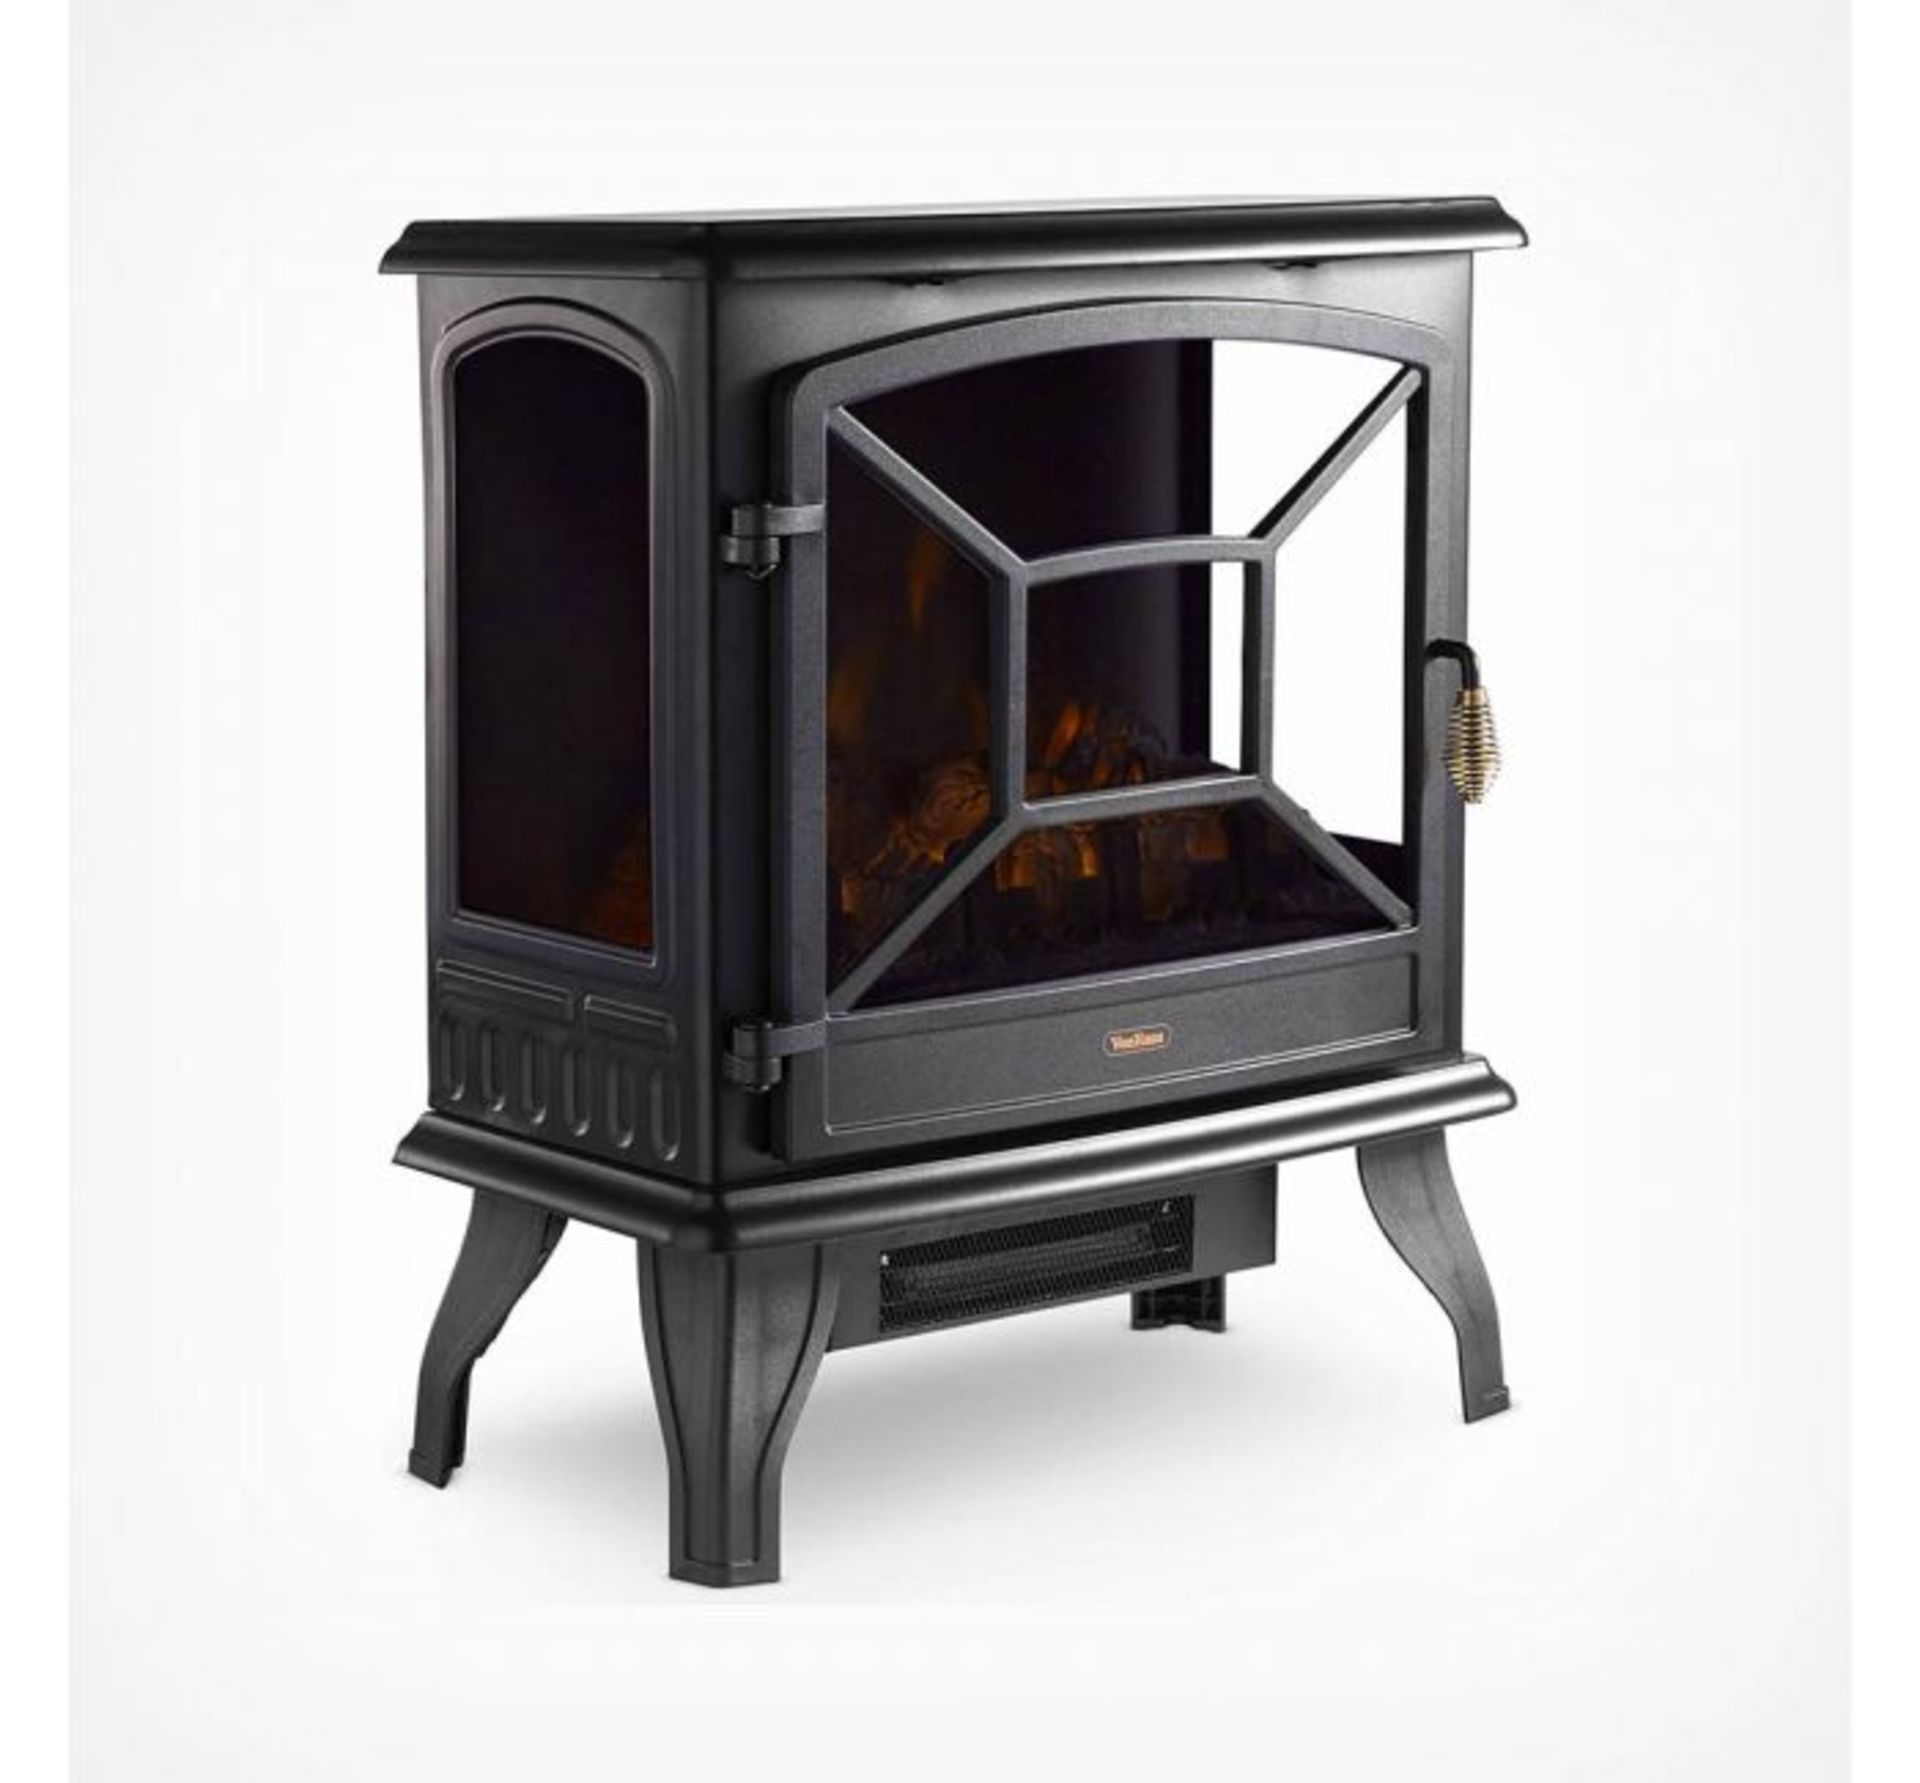 (HZ111) 1800W Black Panoramic Stove Heater Three tempered glass panels give a panoramic view o... - Image 2 of 3